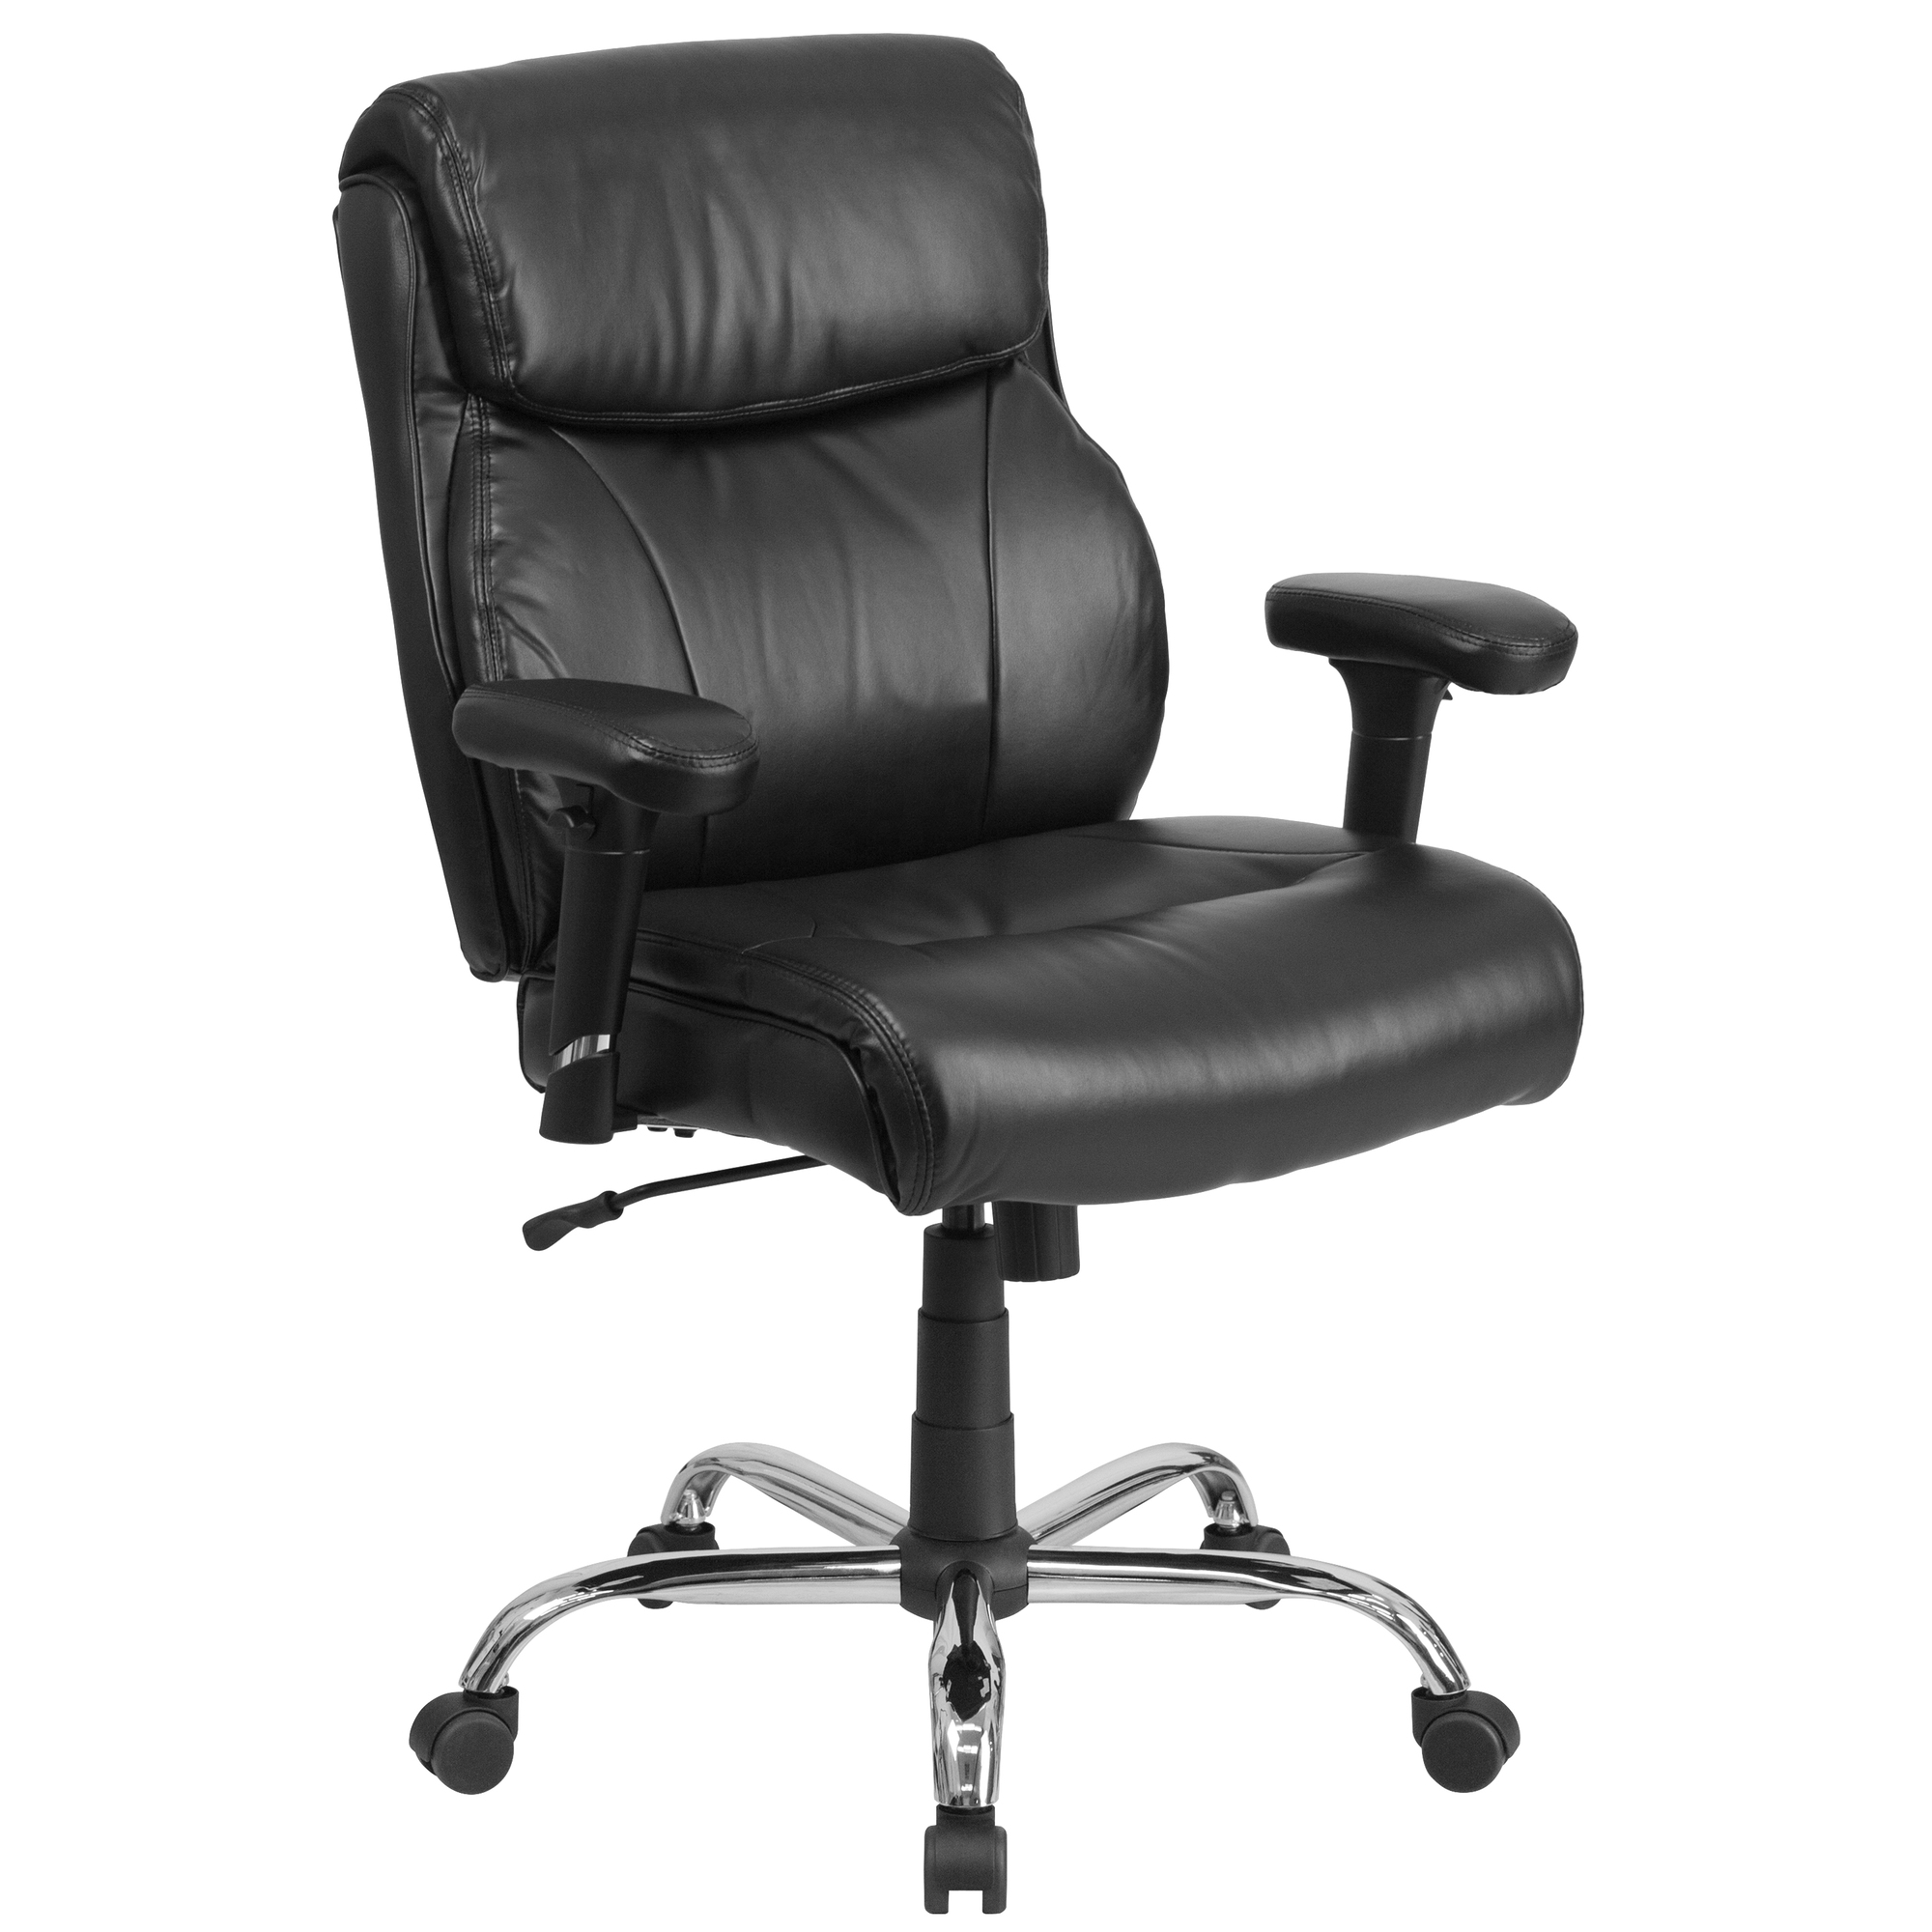 Flash Furniture, 400 lb. Rated Mid-Back Black LeatherSoft Chair, Primary Color Black, Included (qty.) 1, Model GO2031LEA